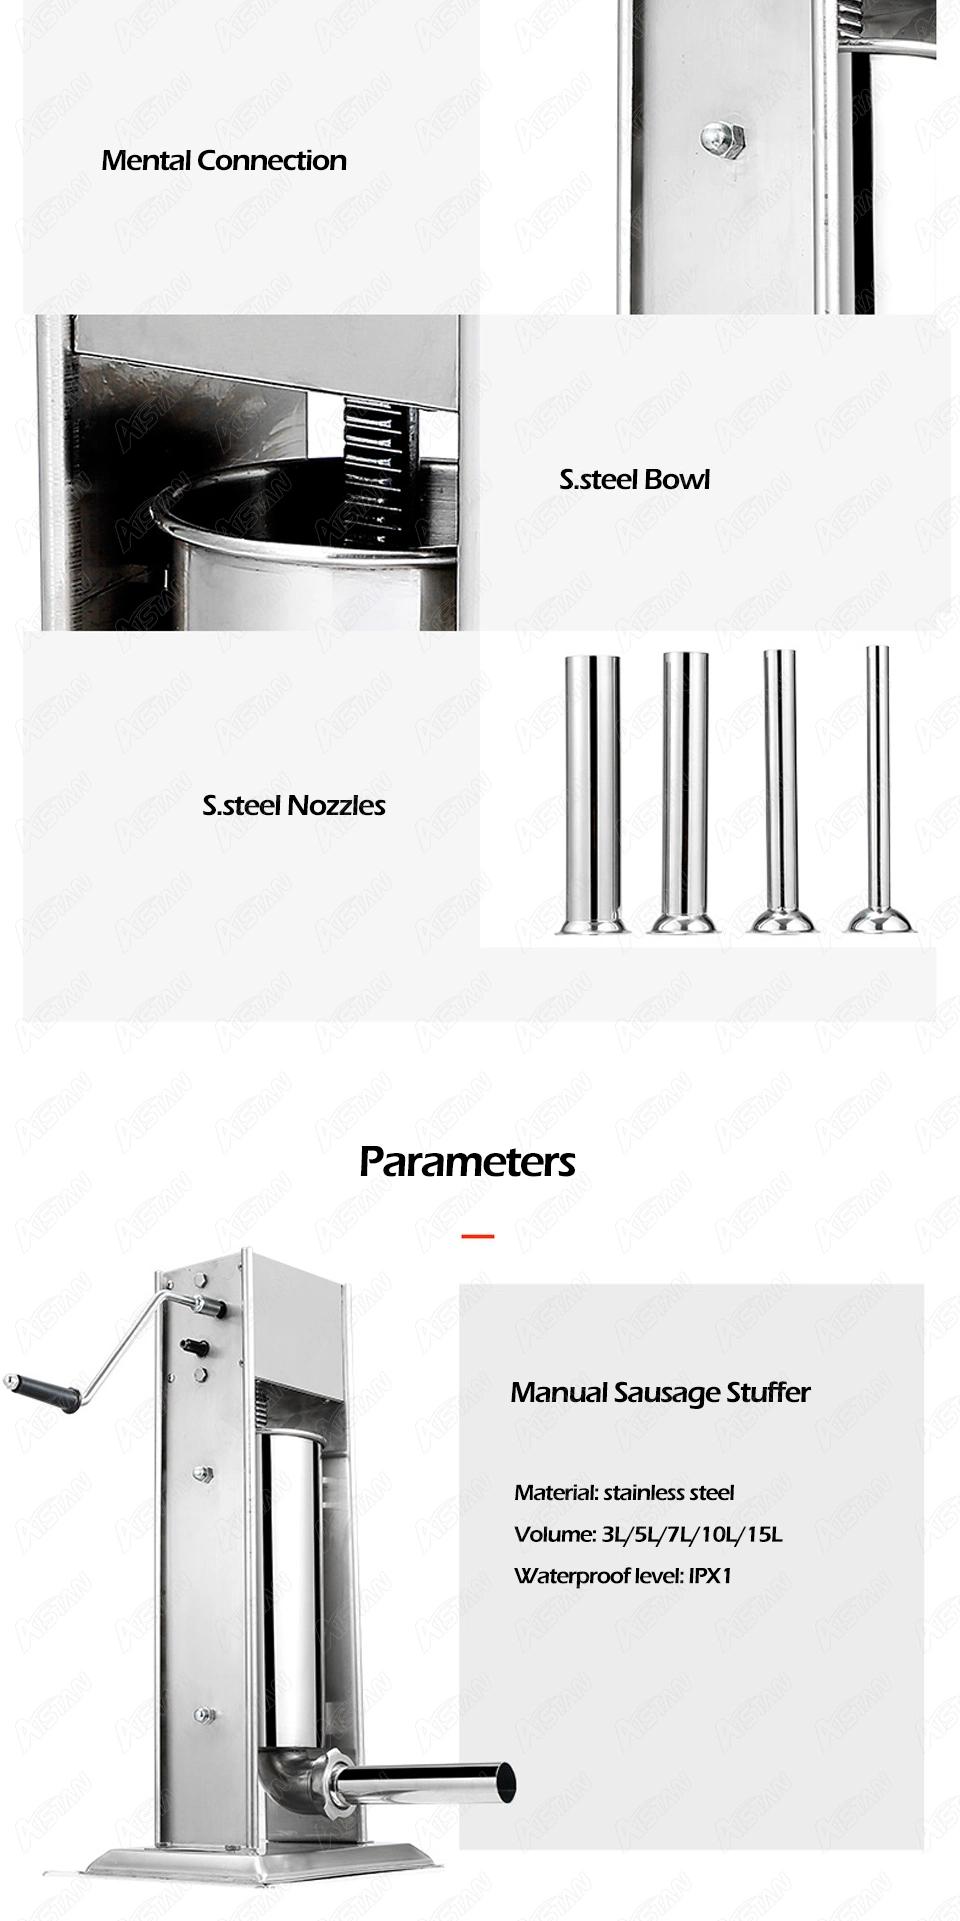 Ys3l Food Grade Stainless Steel Manual Sausage Stuffer 3L Vertical Sausage Filler Filling Machine with 4 Nozzles